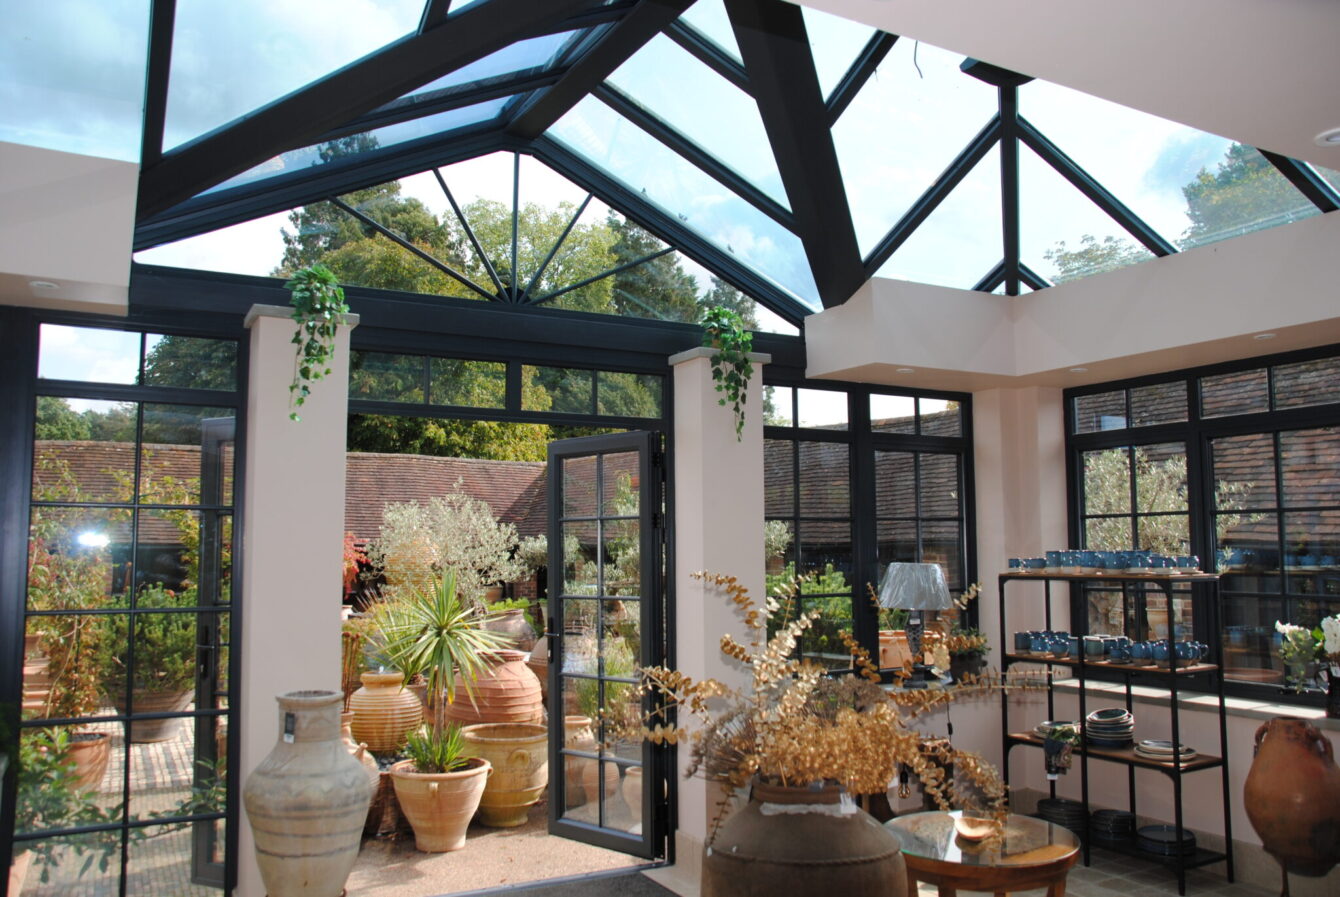 Pots and Pithoi conservatory interior